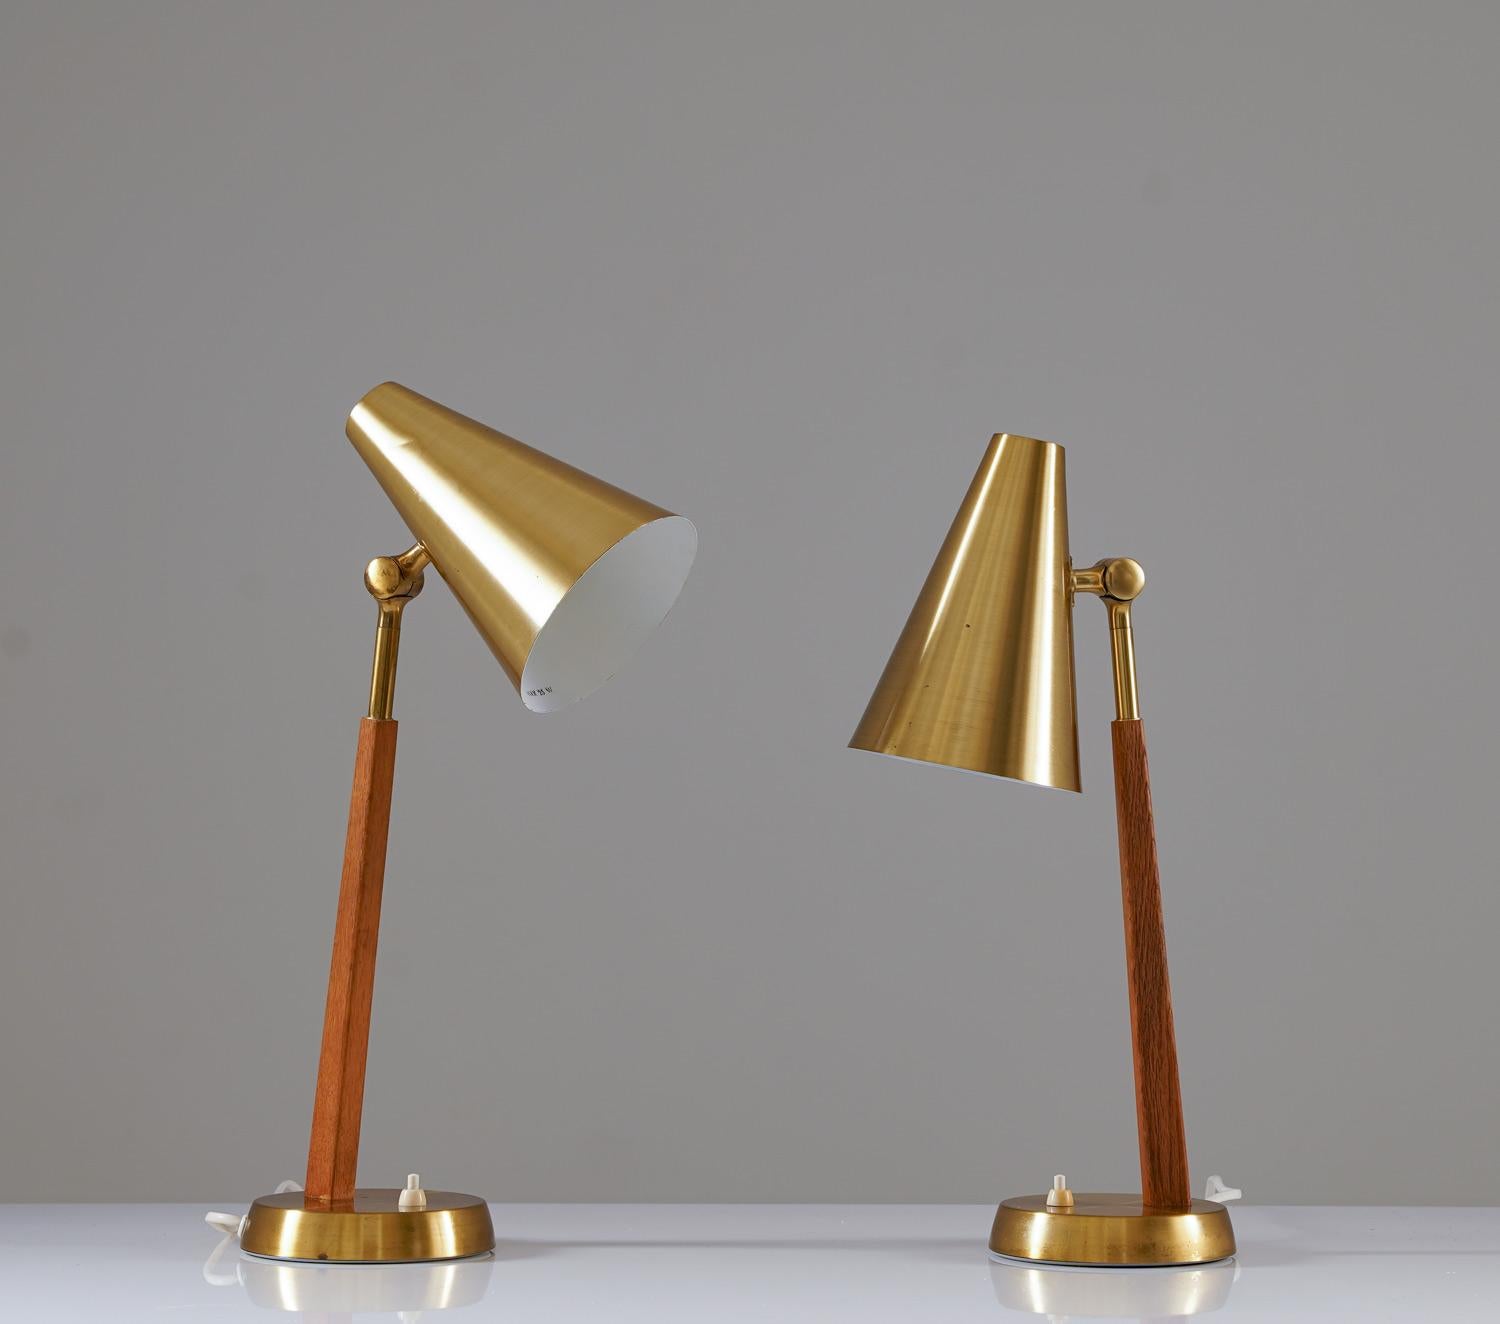 Beautiful table lamps manufactured by Falkenbergs Belysning, circa 1950.
These lamps are made of brass, with details in oak. The light sources are hidden by beautiful cone-shaped brass shades. 
Price is per lamp.

Condition: Good original